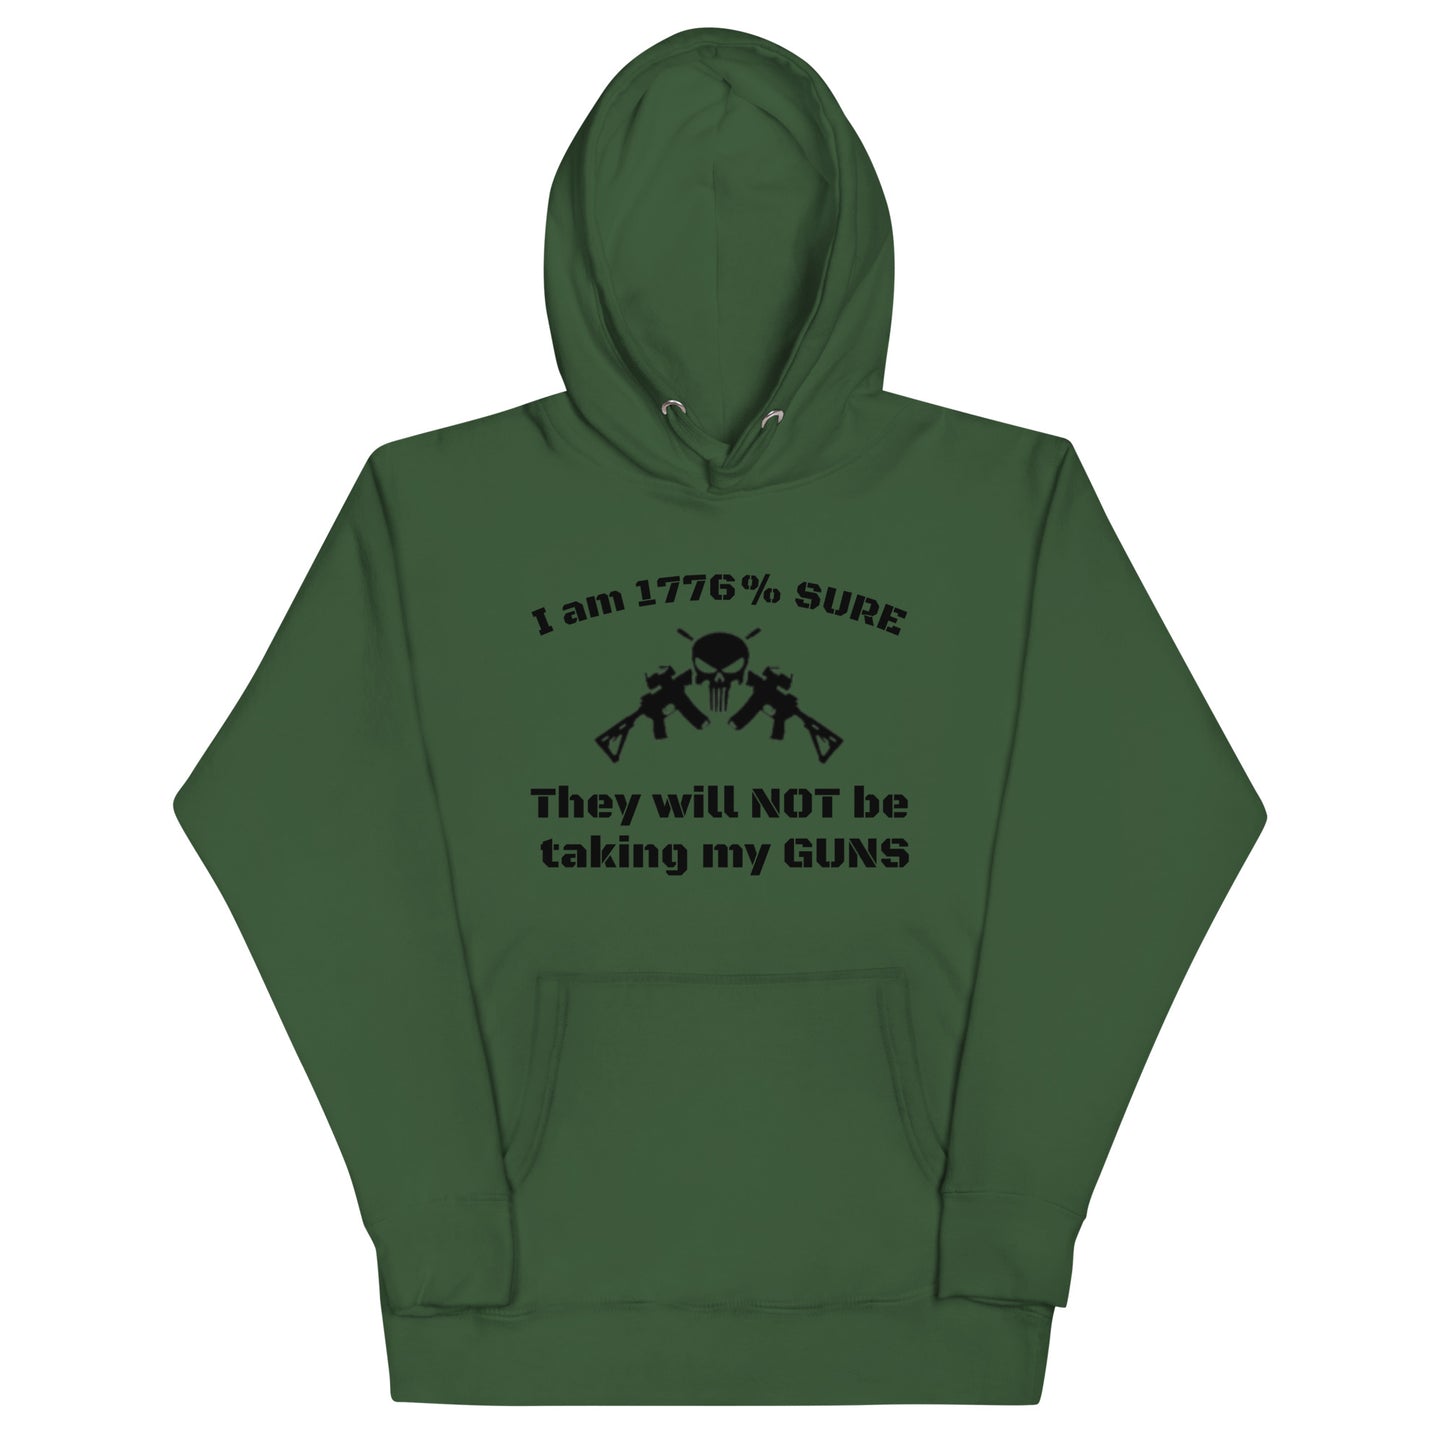 I am 1776% sure they will not be taking my guns (Punisher) Unisex Hoodie